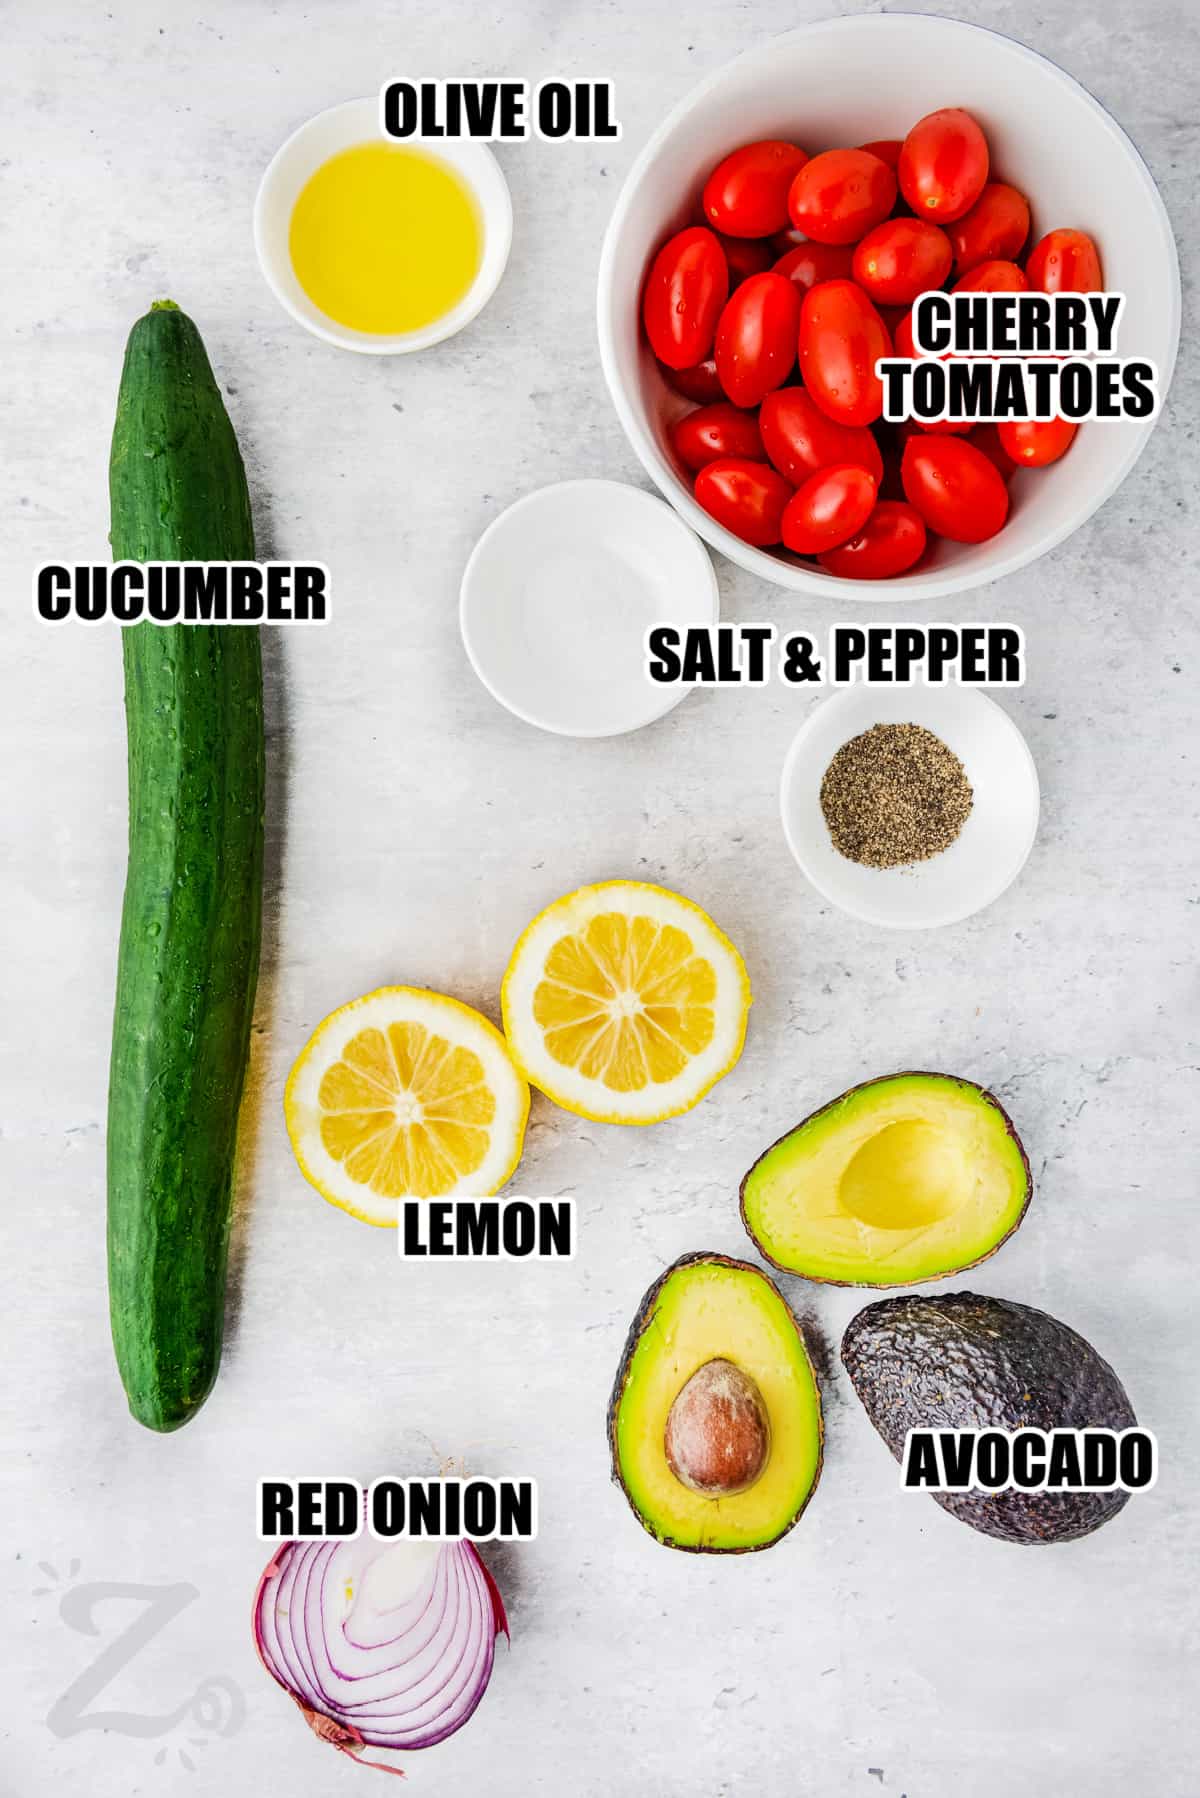 ingredients to make avocado salad labeled: cucumber, cherry tomatoes, olive oil, salt and pepper, lemon, avocados, red onions